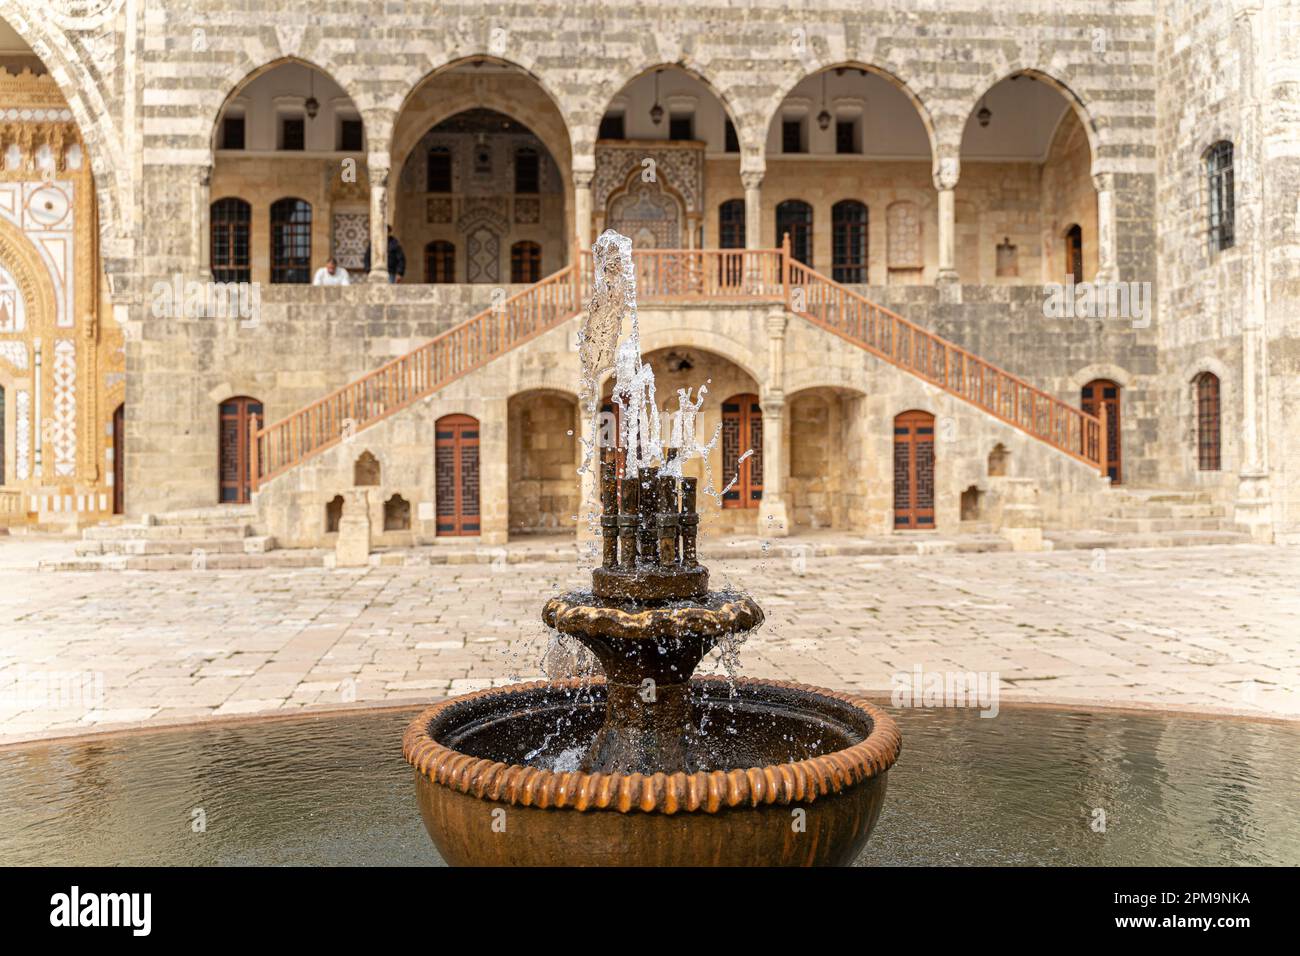 Old historic Beiteddine Palace courtyard with fountain, traditional Lebanese architecture, Lebanon Stock Photo